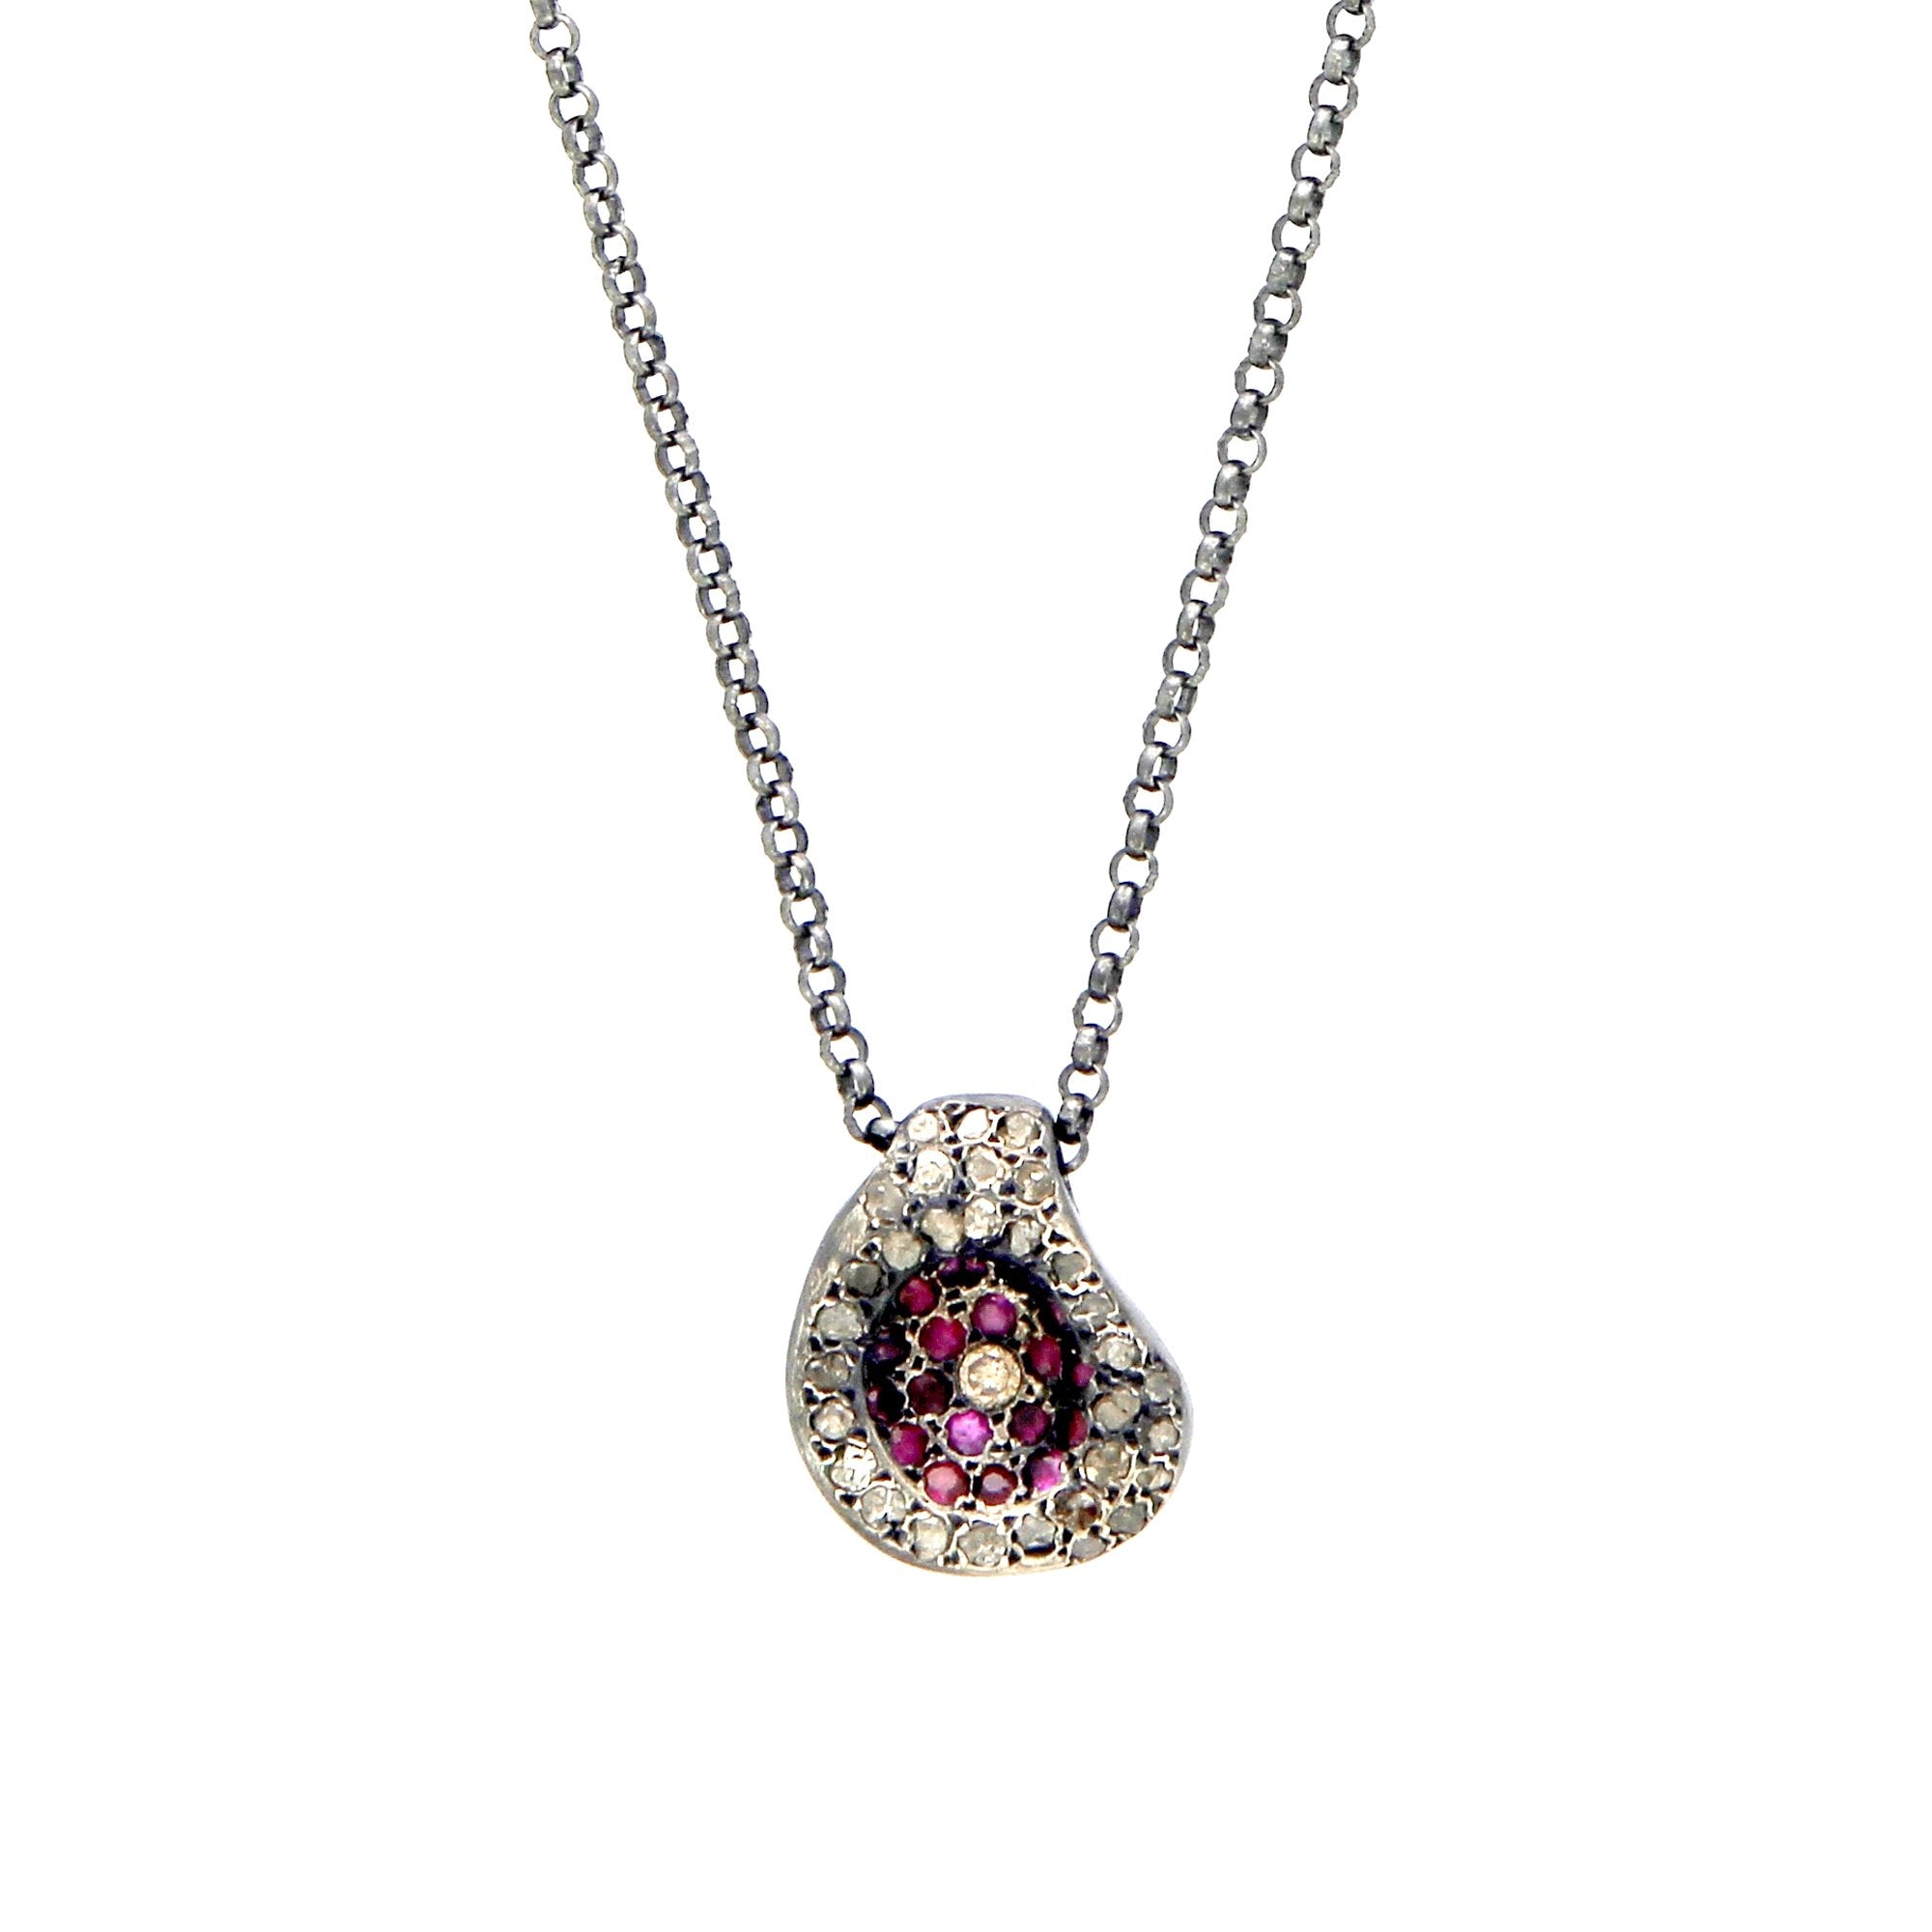 Icy Grey Diamonds and Rubies Necklace